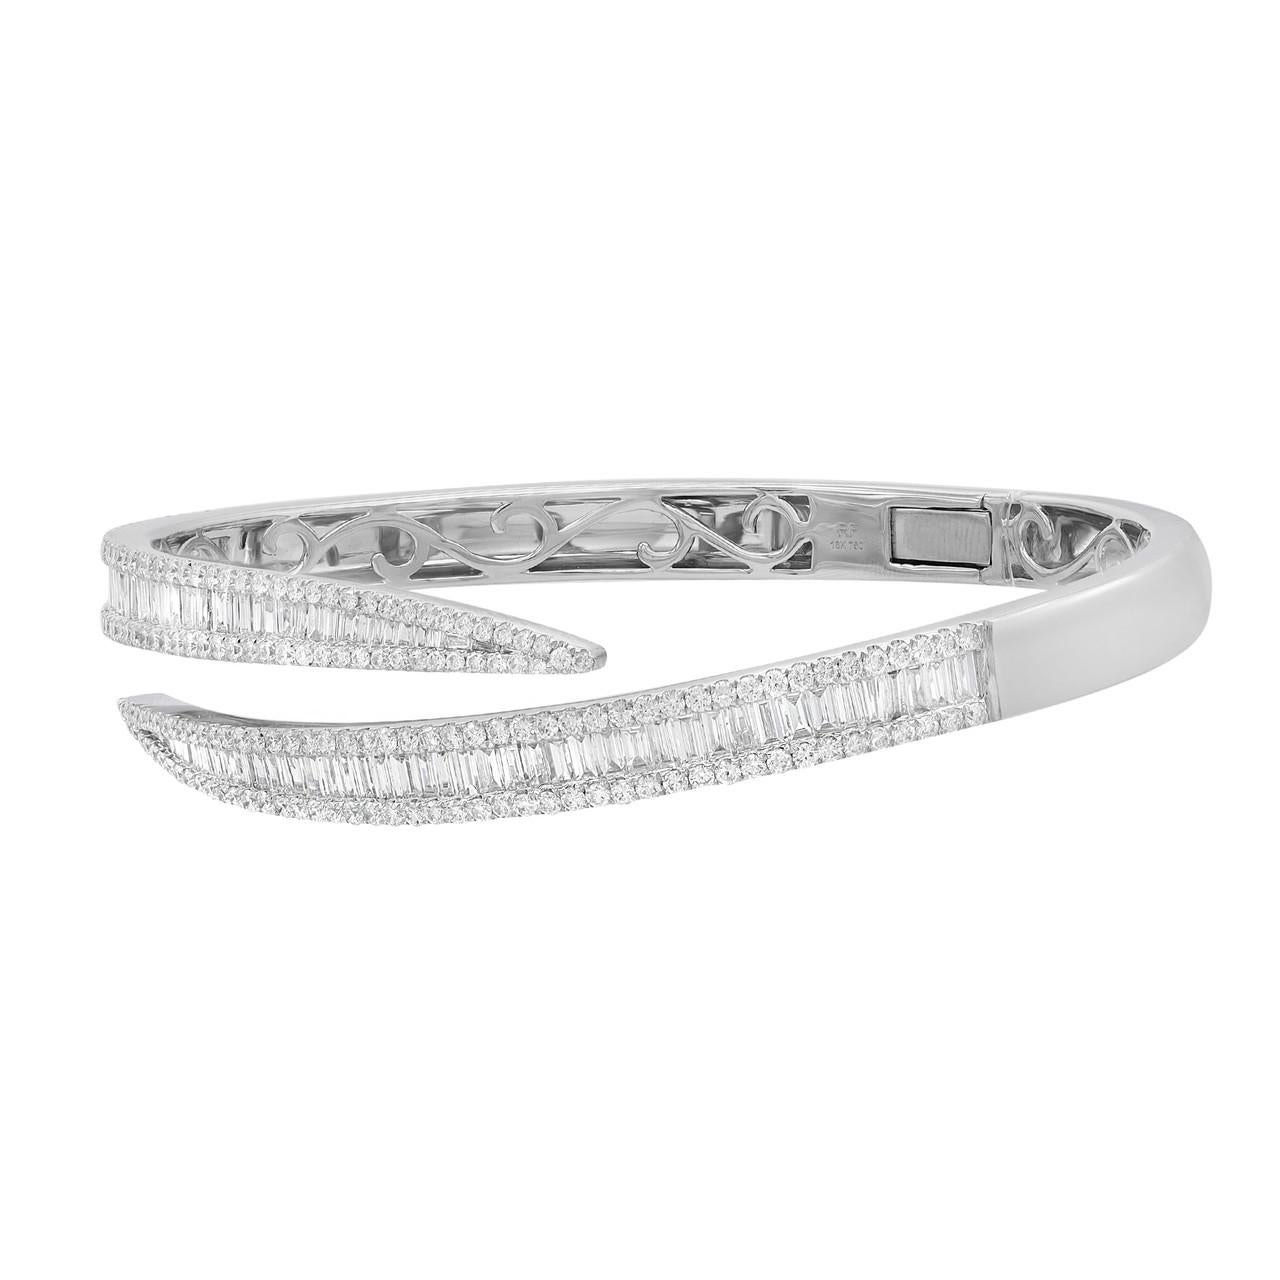 Introducing the stunning and modern Brilliant Fashion Bangle, a true testament to the beauty of diamonds. This exquisite bangle features a central row of vertically-set baguette-cut diamonds, surrounded by framing rows of round-cut diamonds,